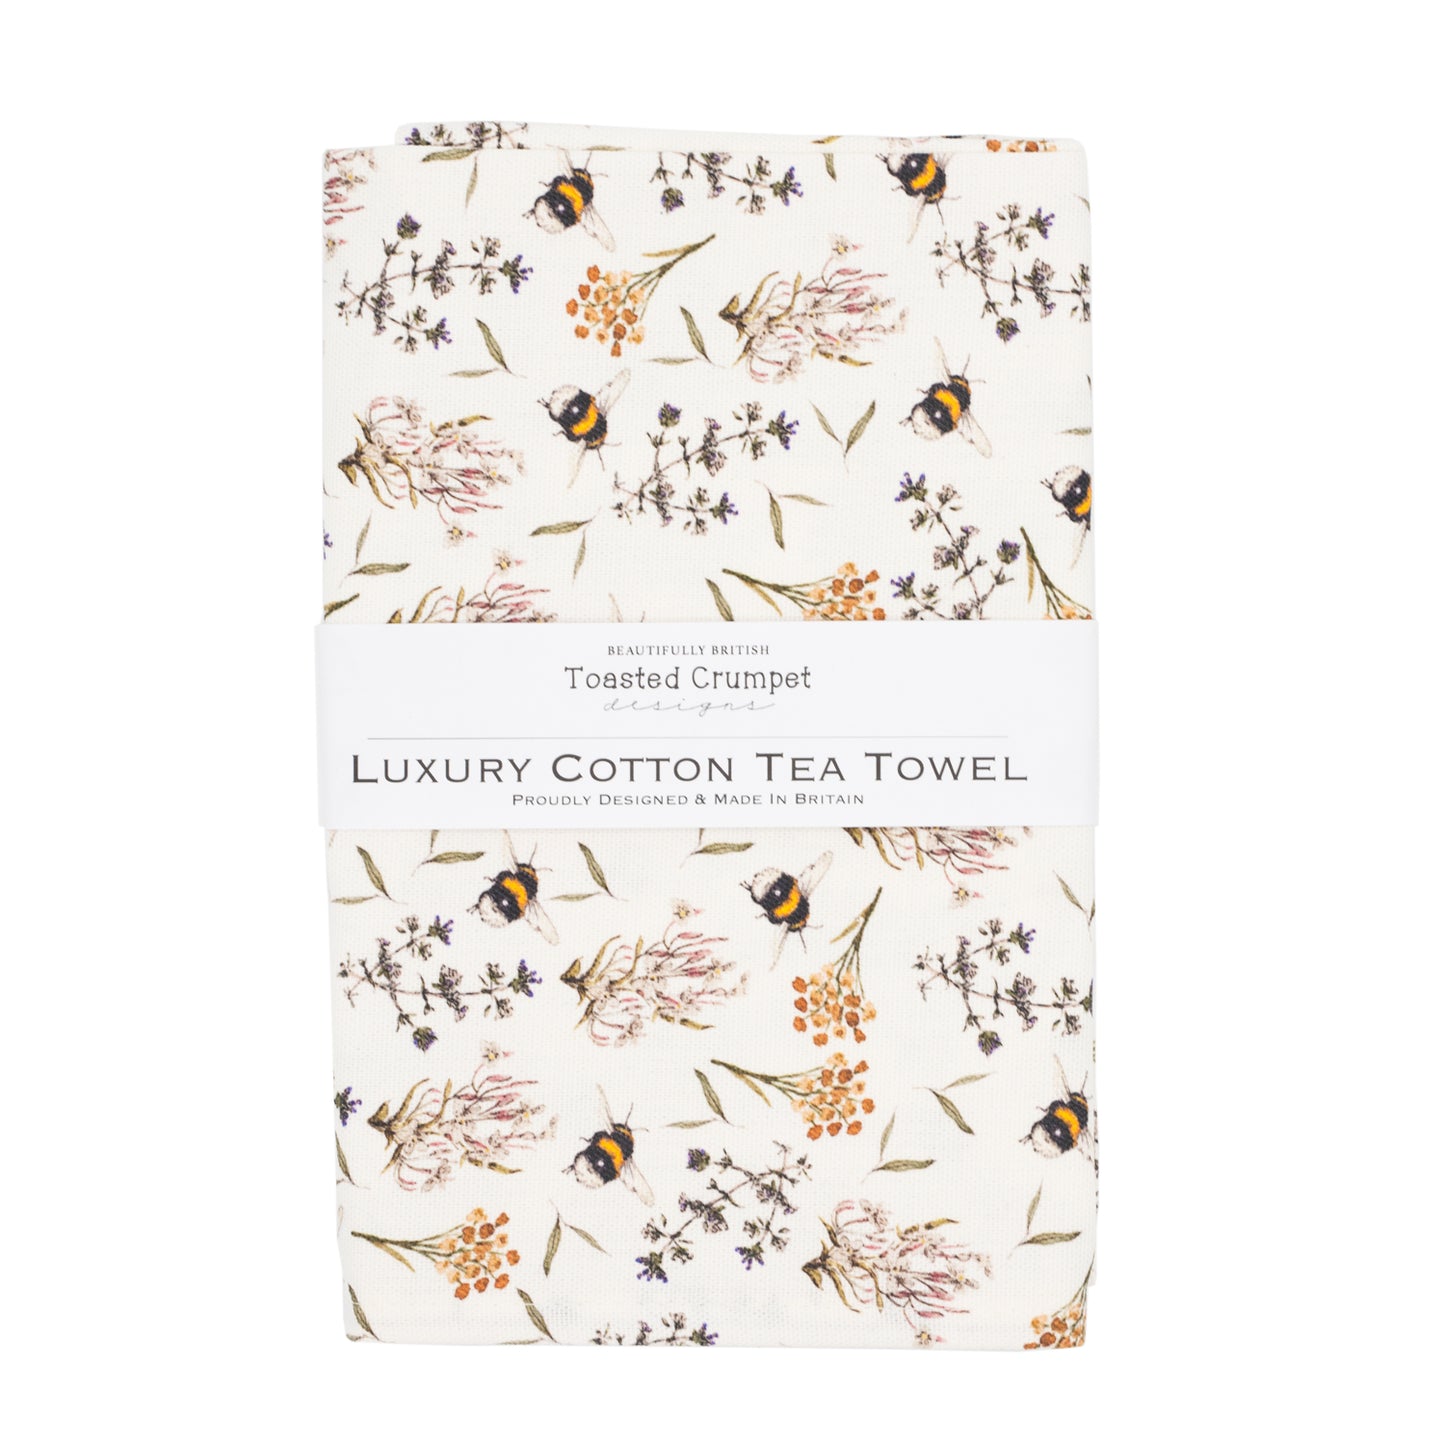 Tea towel with bee and floral pattern folded into a rectangular shape with a white belly band with Toasted Crumpet branding. Photographed against a white background.